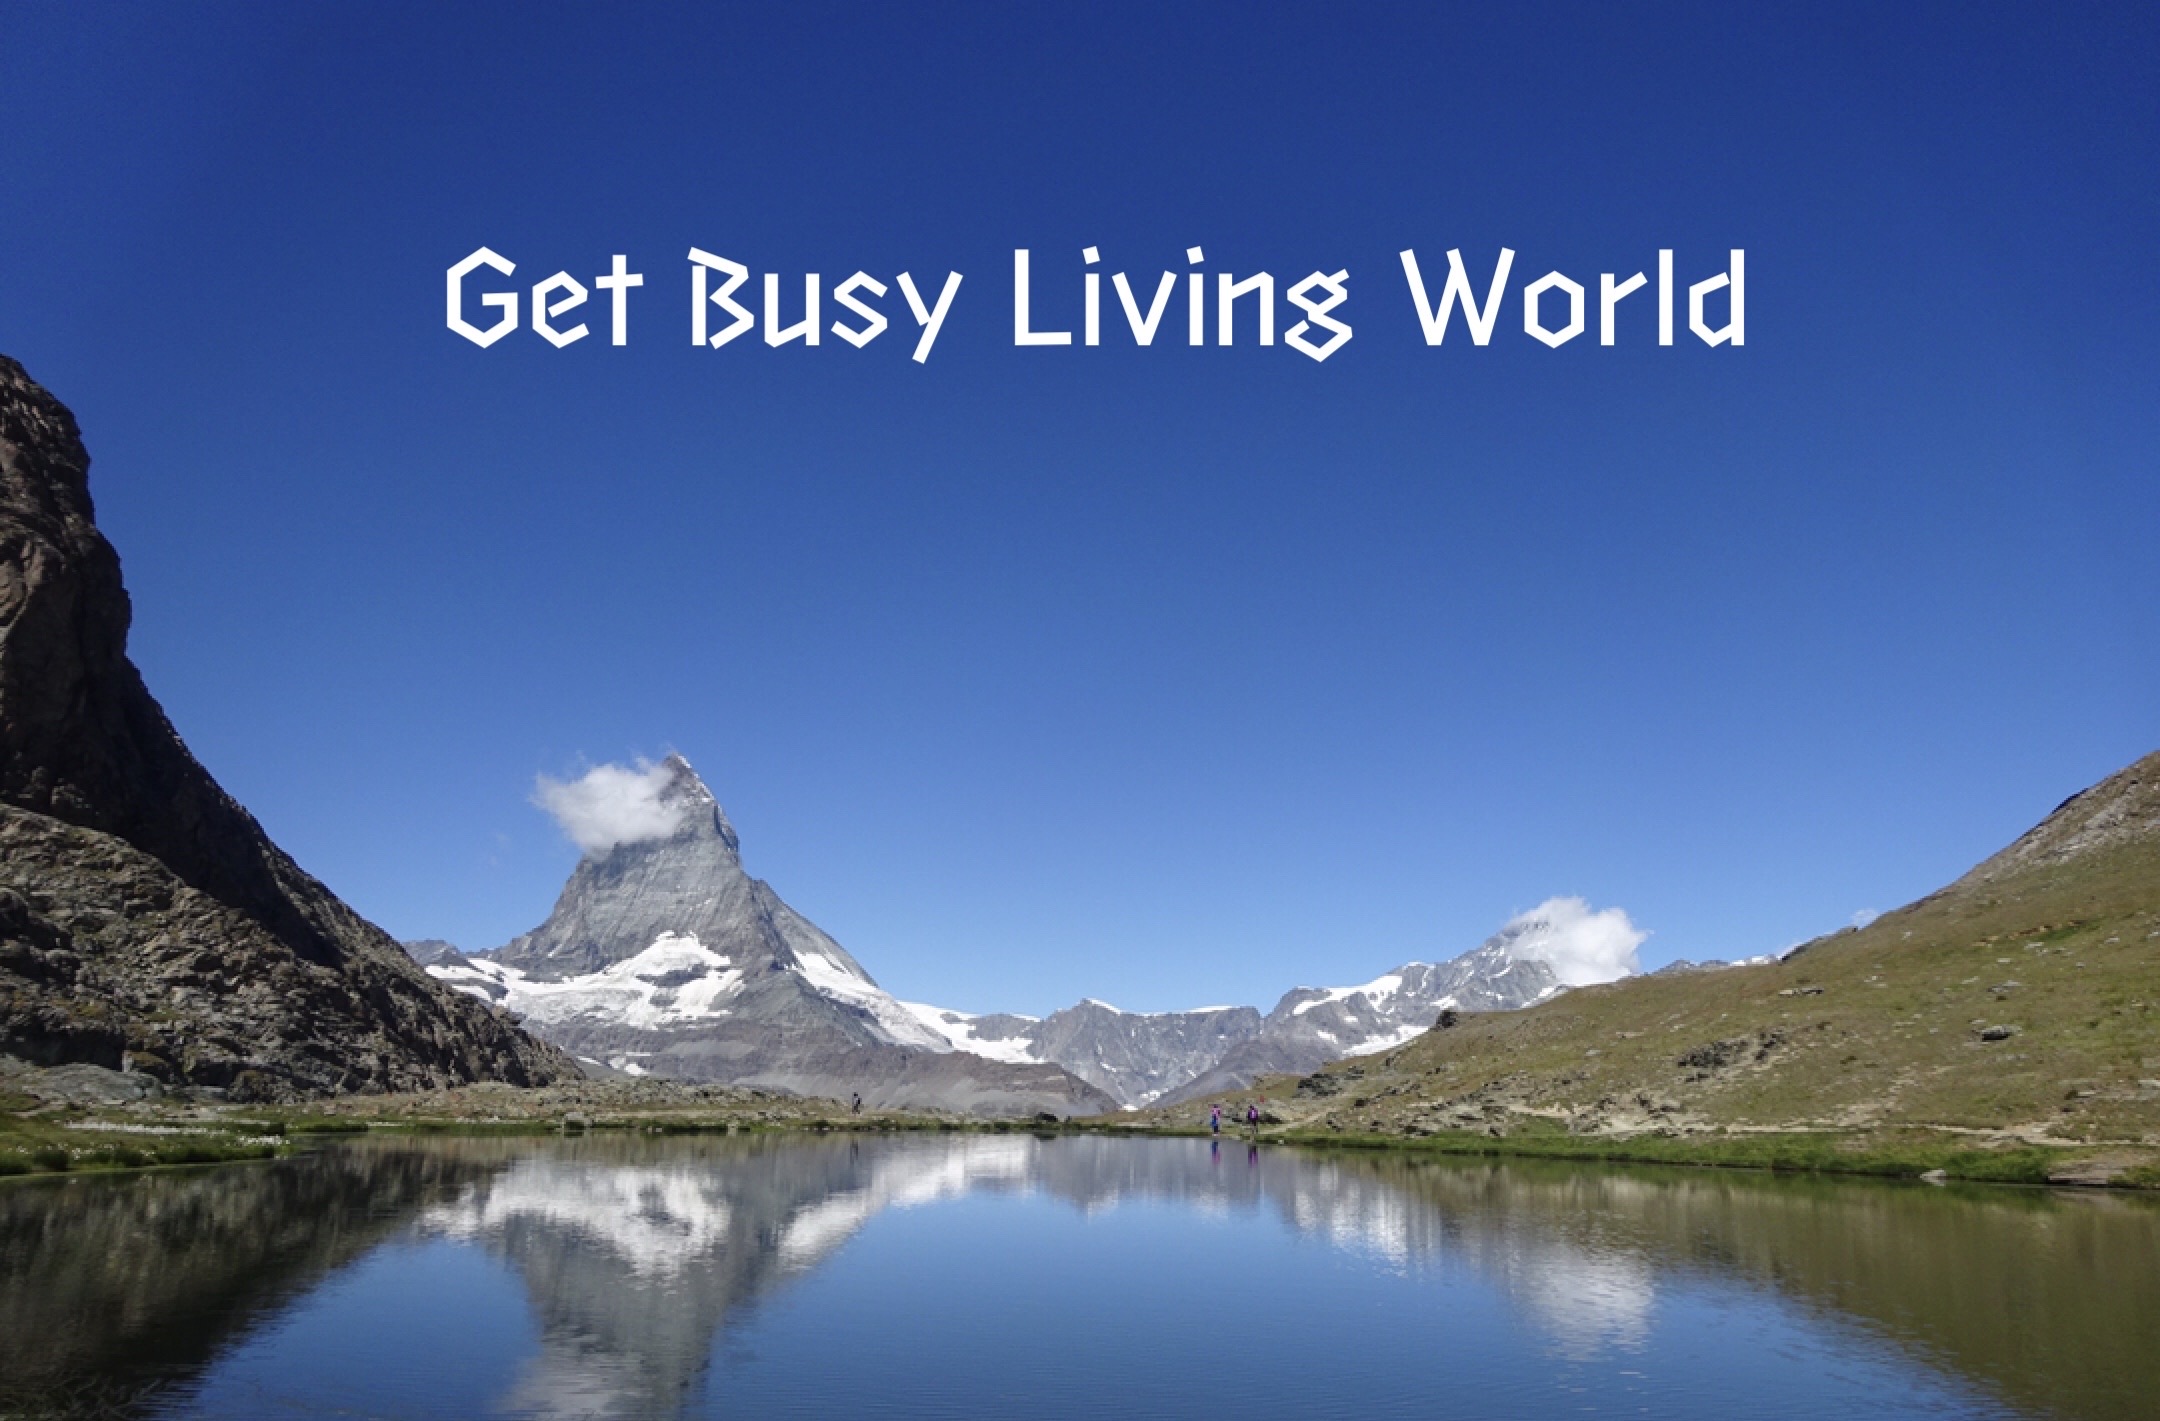 Get Busy Living World